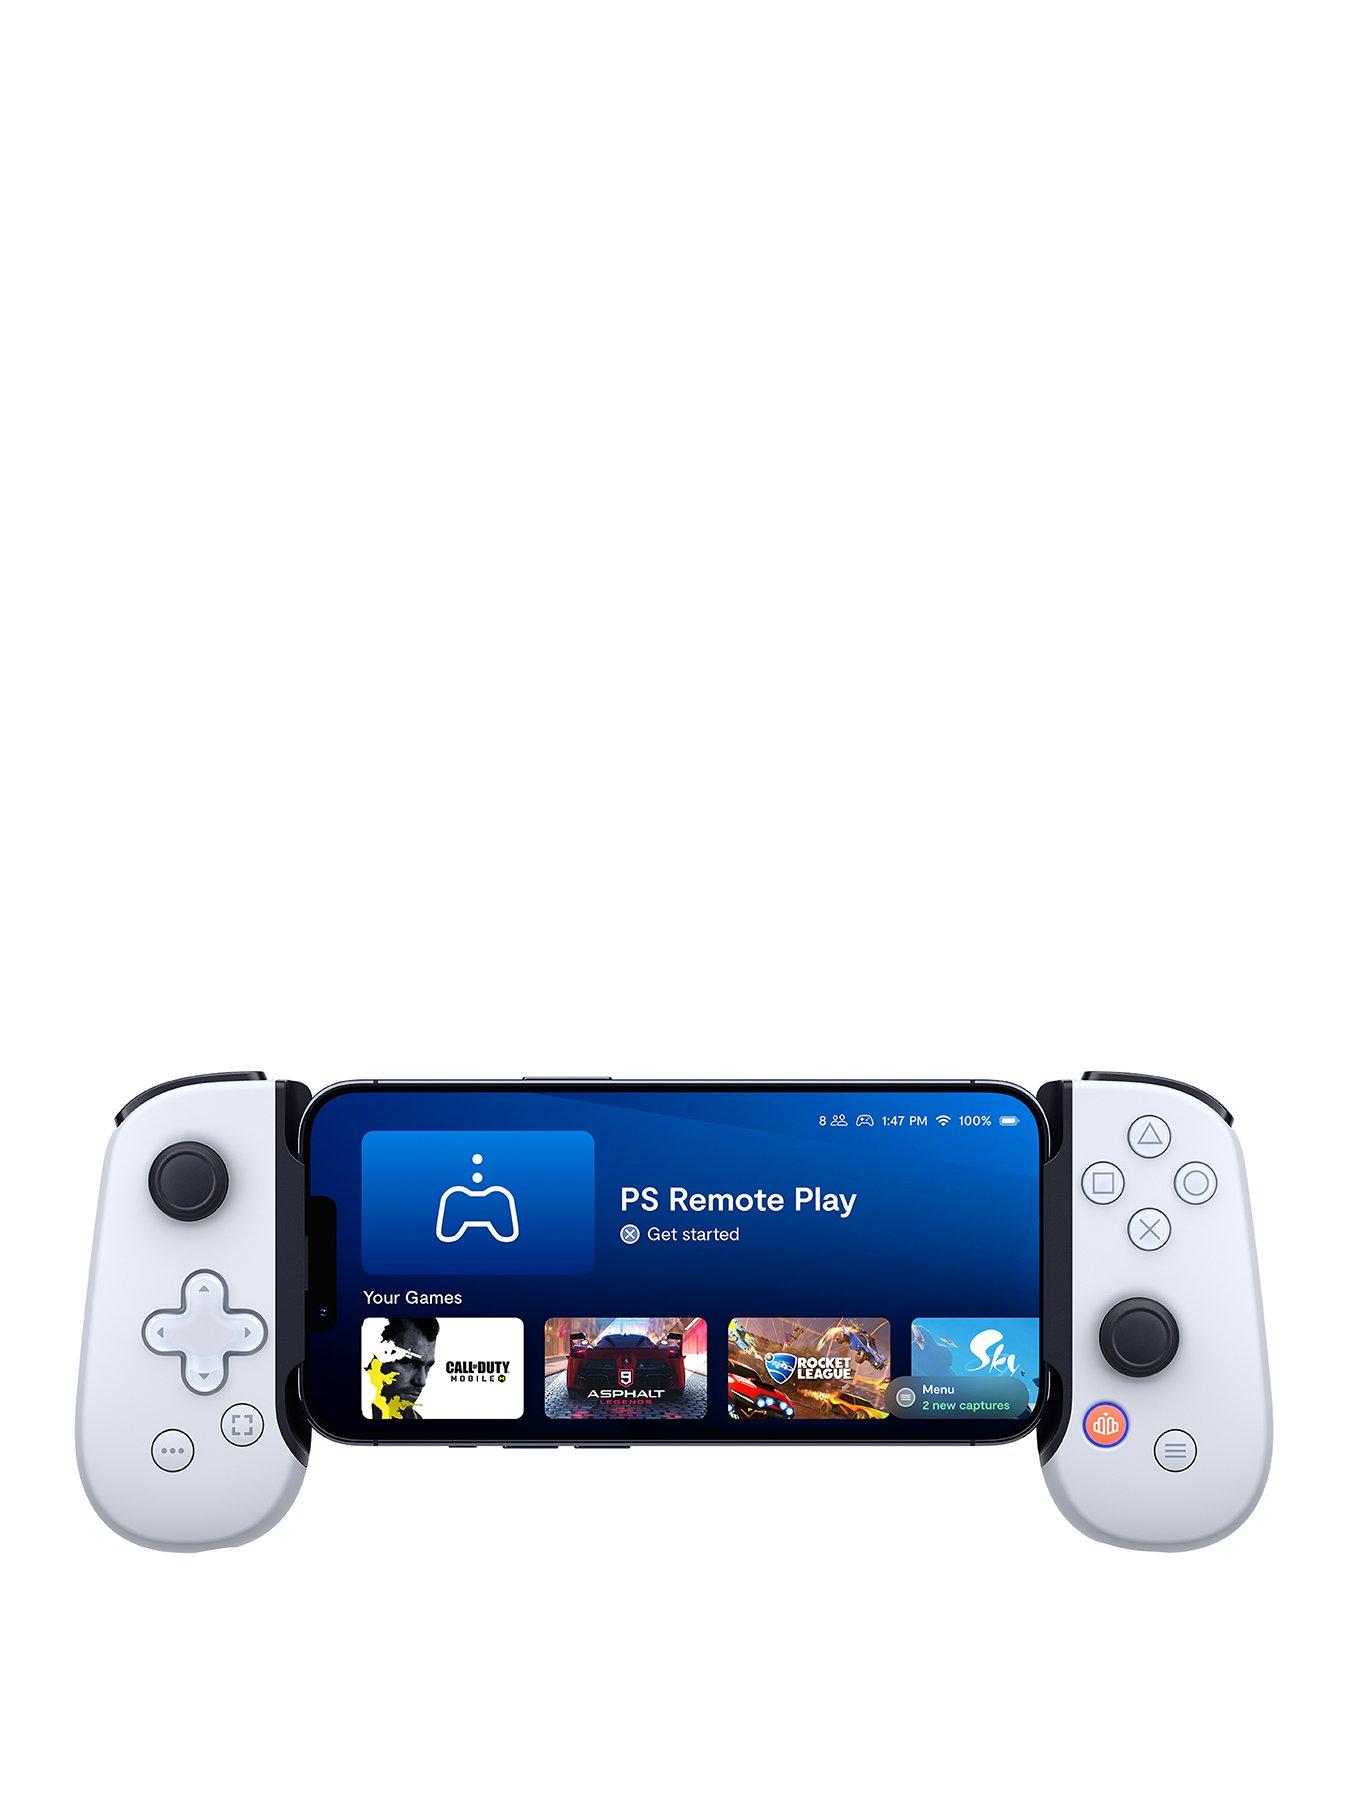 The first official PlayStation-friendly iPhone controller is a